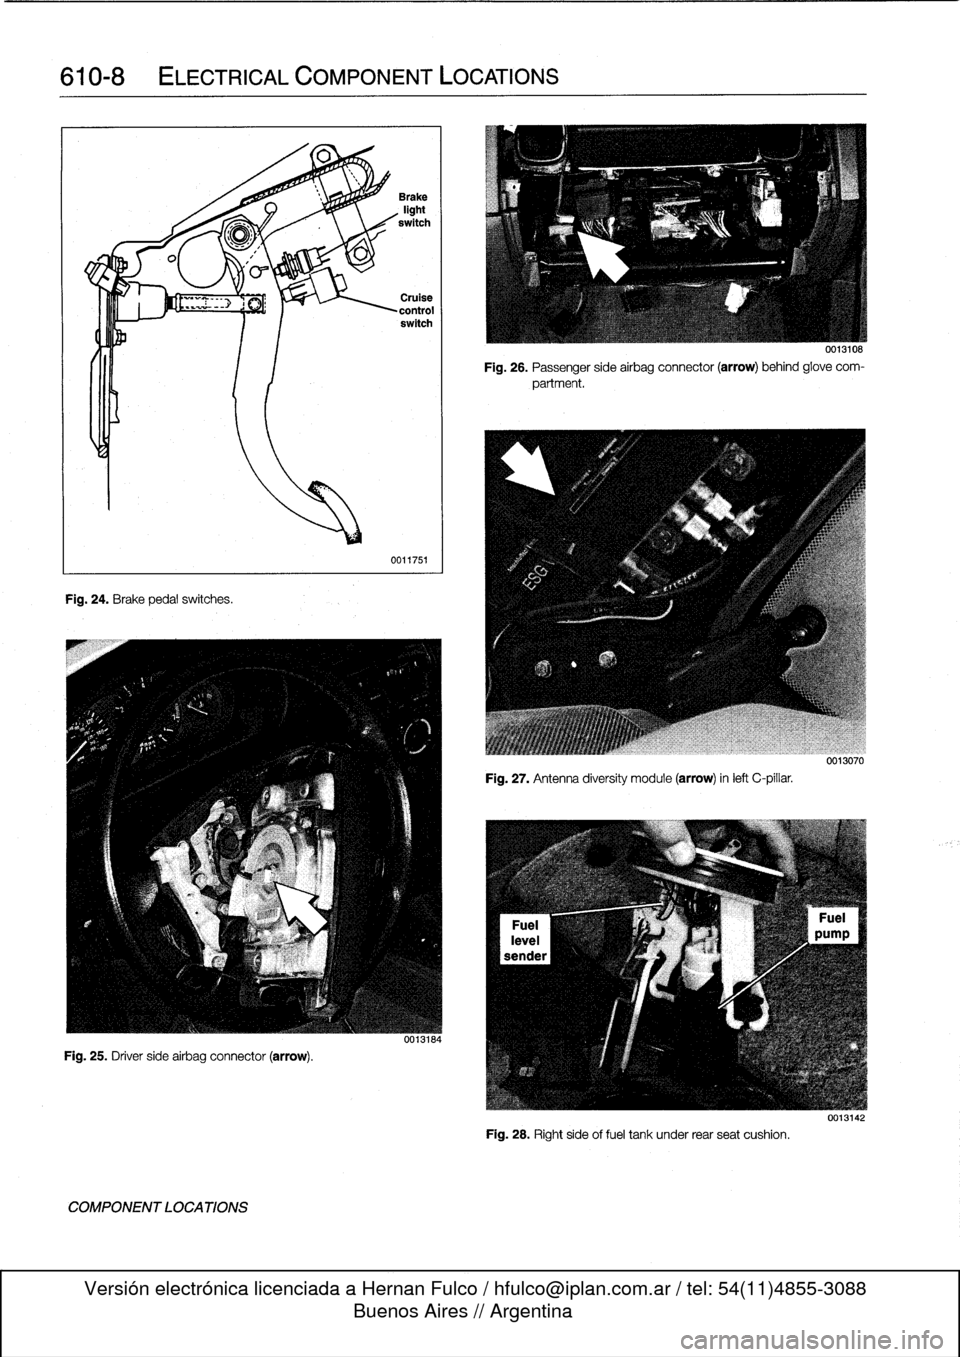 BMW M3 1998 E36 Owners Guide 
610-$

	

ELECTRICAL
COMPONENT
LOCATIONS

Fig
.
24
.
Brake
pedalswitches
.

Fig
.
25
.
Driver
side
airbag
connector
(arrow)
.

COMPONENT
LOCATIONS

0011751

Fig
.
26
.
Passenger
sideairbag
connector
